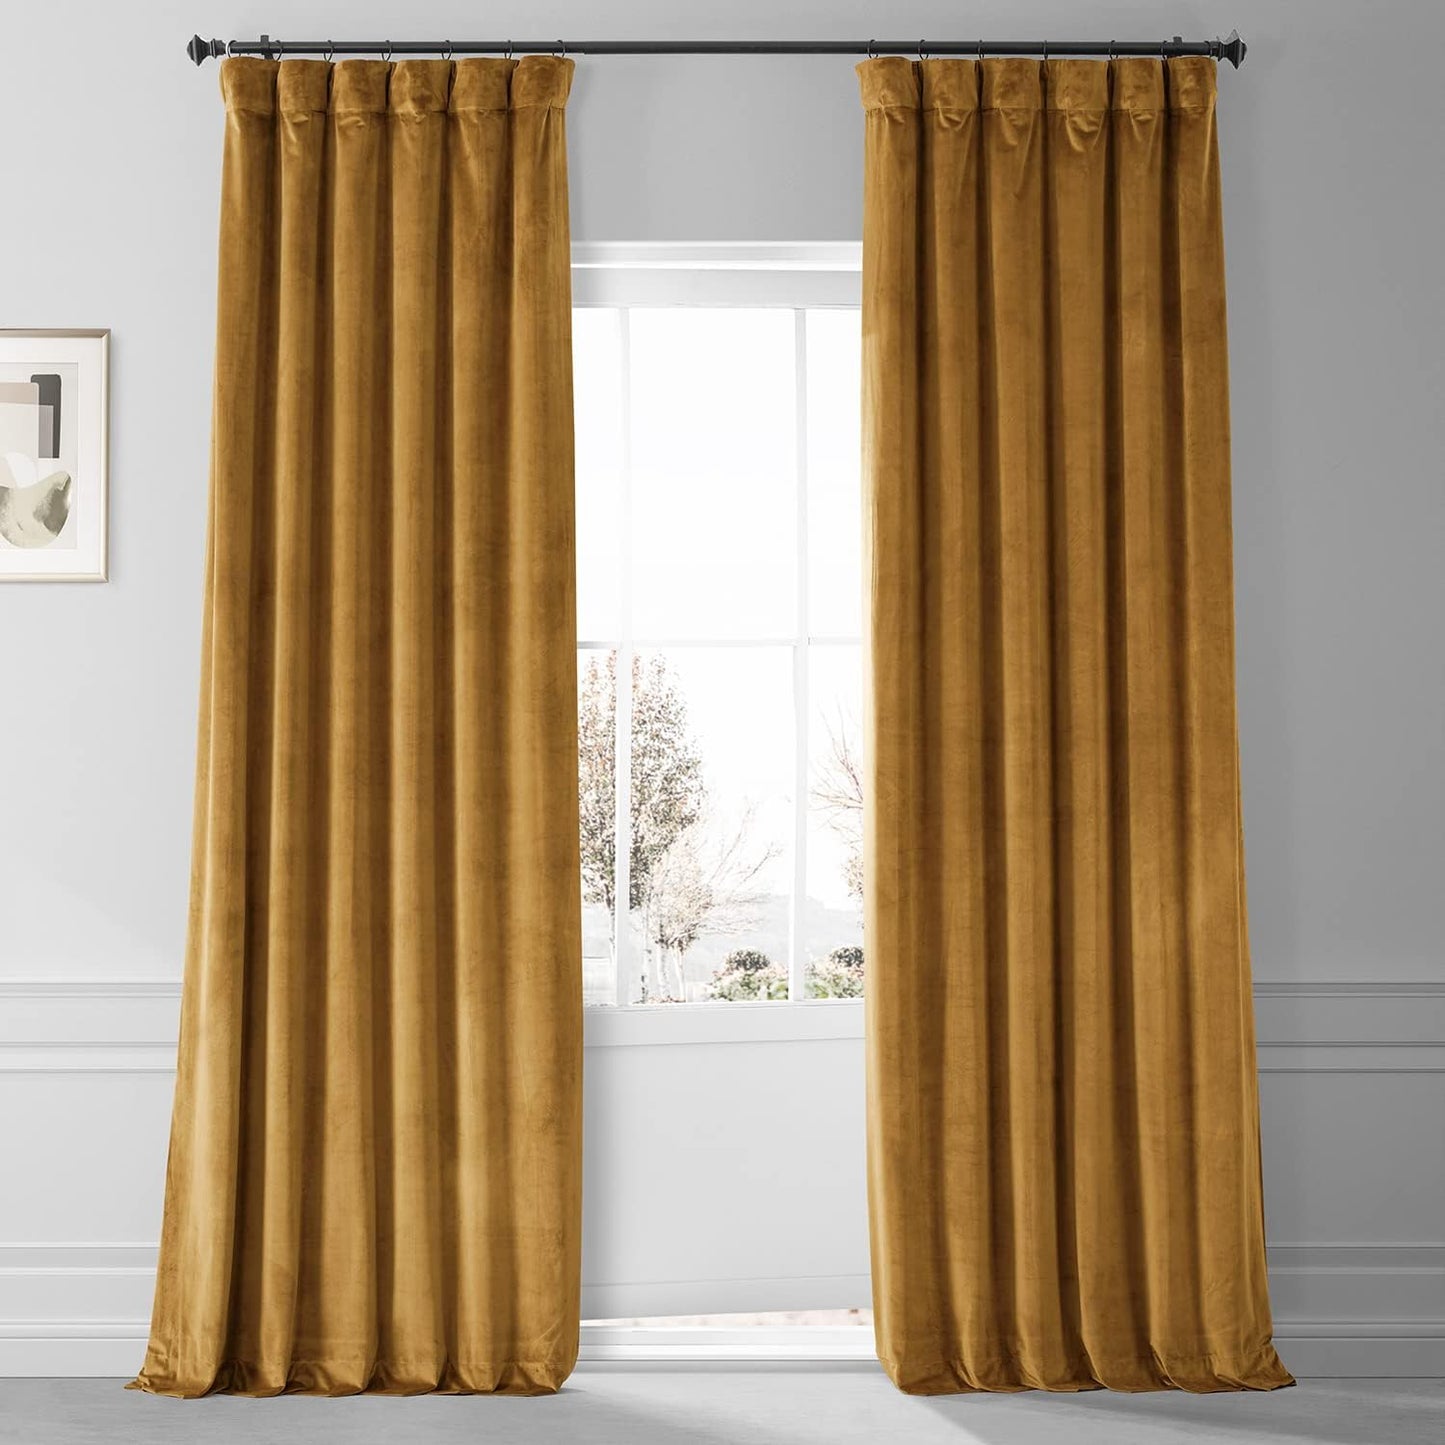 HPD HALF PRICE DRAPES Blackout Solid Thermal Insulated Window Curtain 50 X 96 Signature Plush Velvet Curtains for Bedroom & Living Room (1 Panel), VPYC-SBO198593-96, Diva Cream  Exclusive Fabrics & Furnishings Apple Cider Gold 50 X 108 